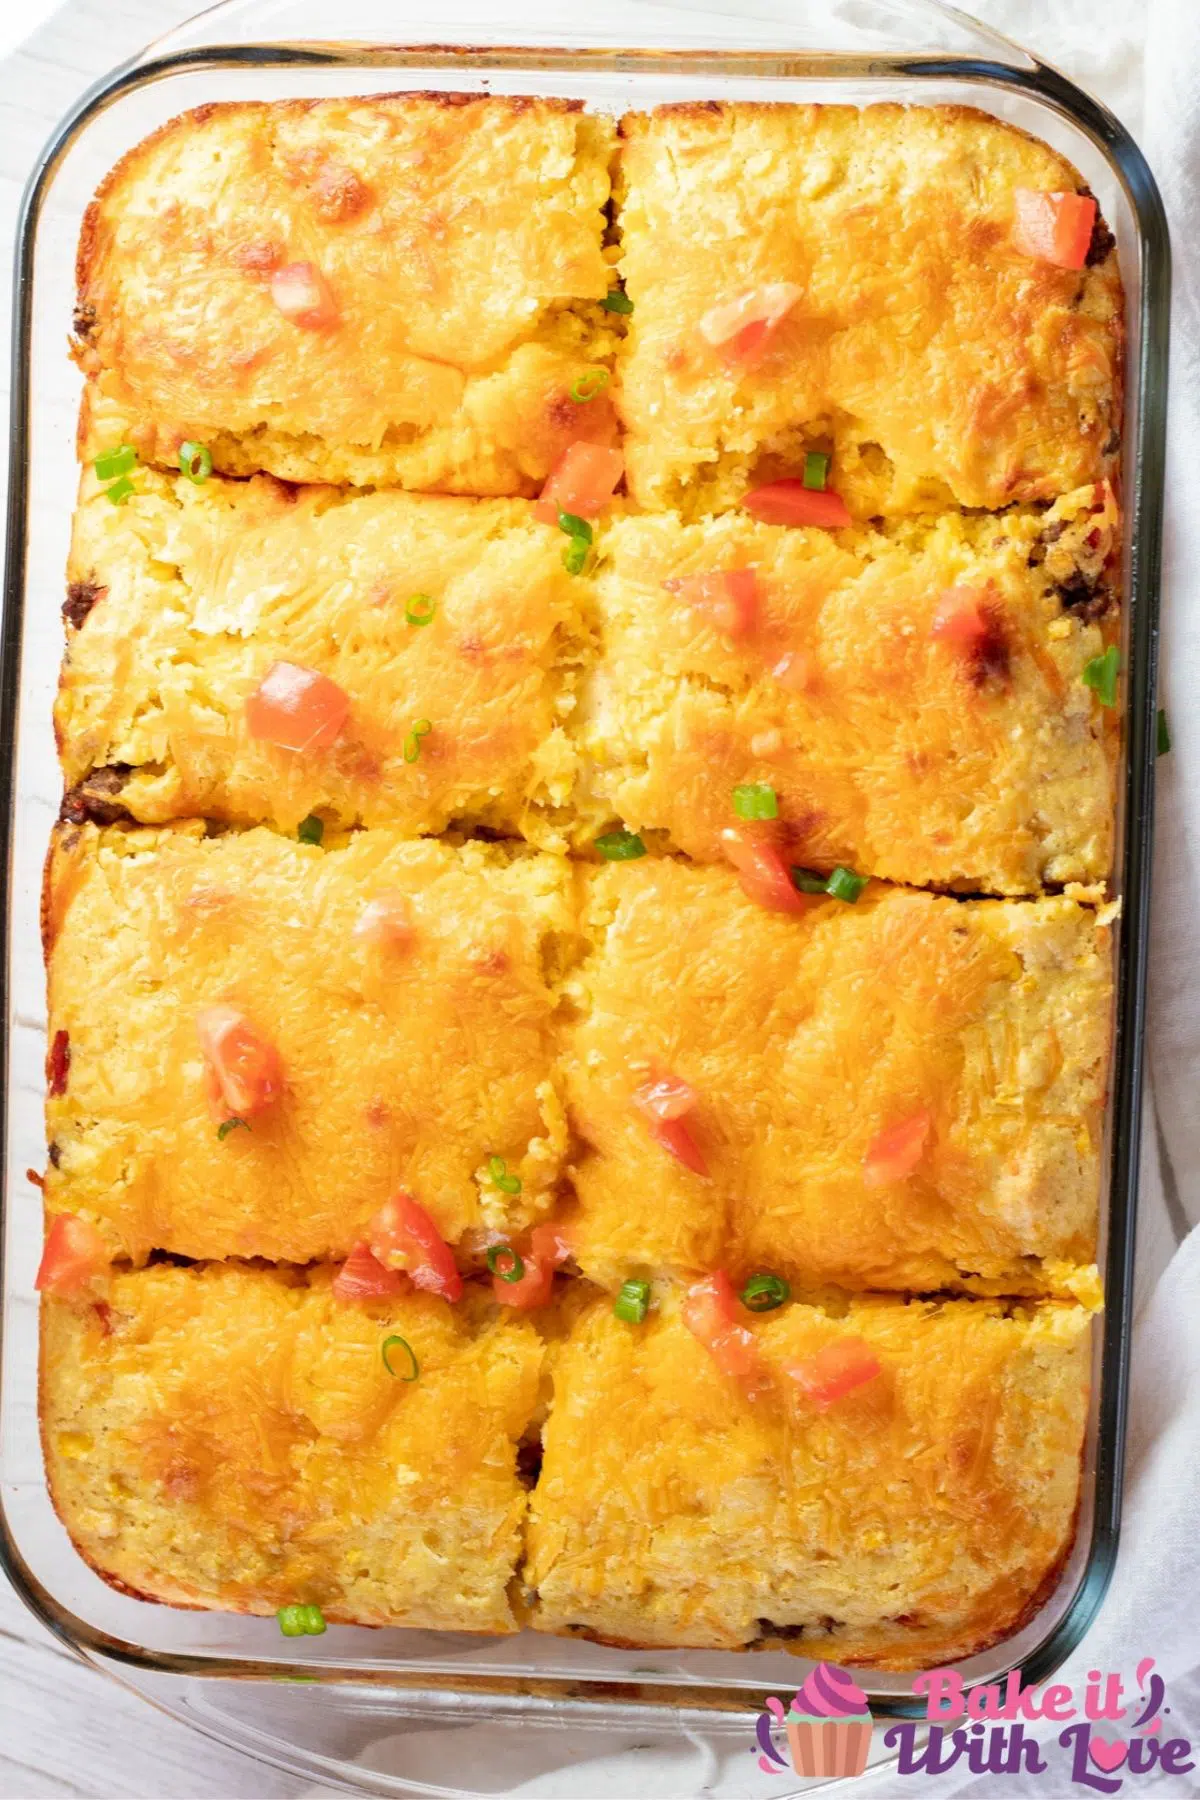 Tall overhead image of the baked Mexican cornbread casserole cut into 8 squares for serving.